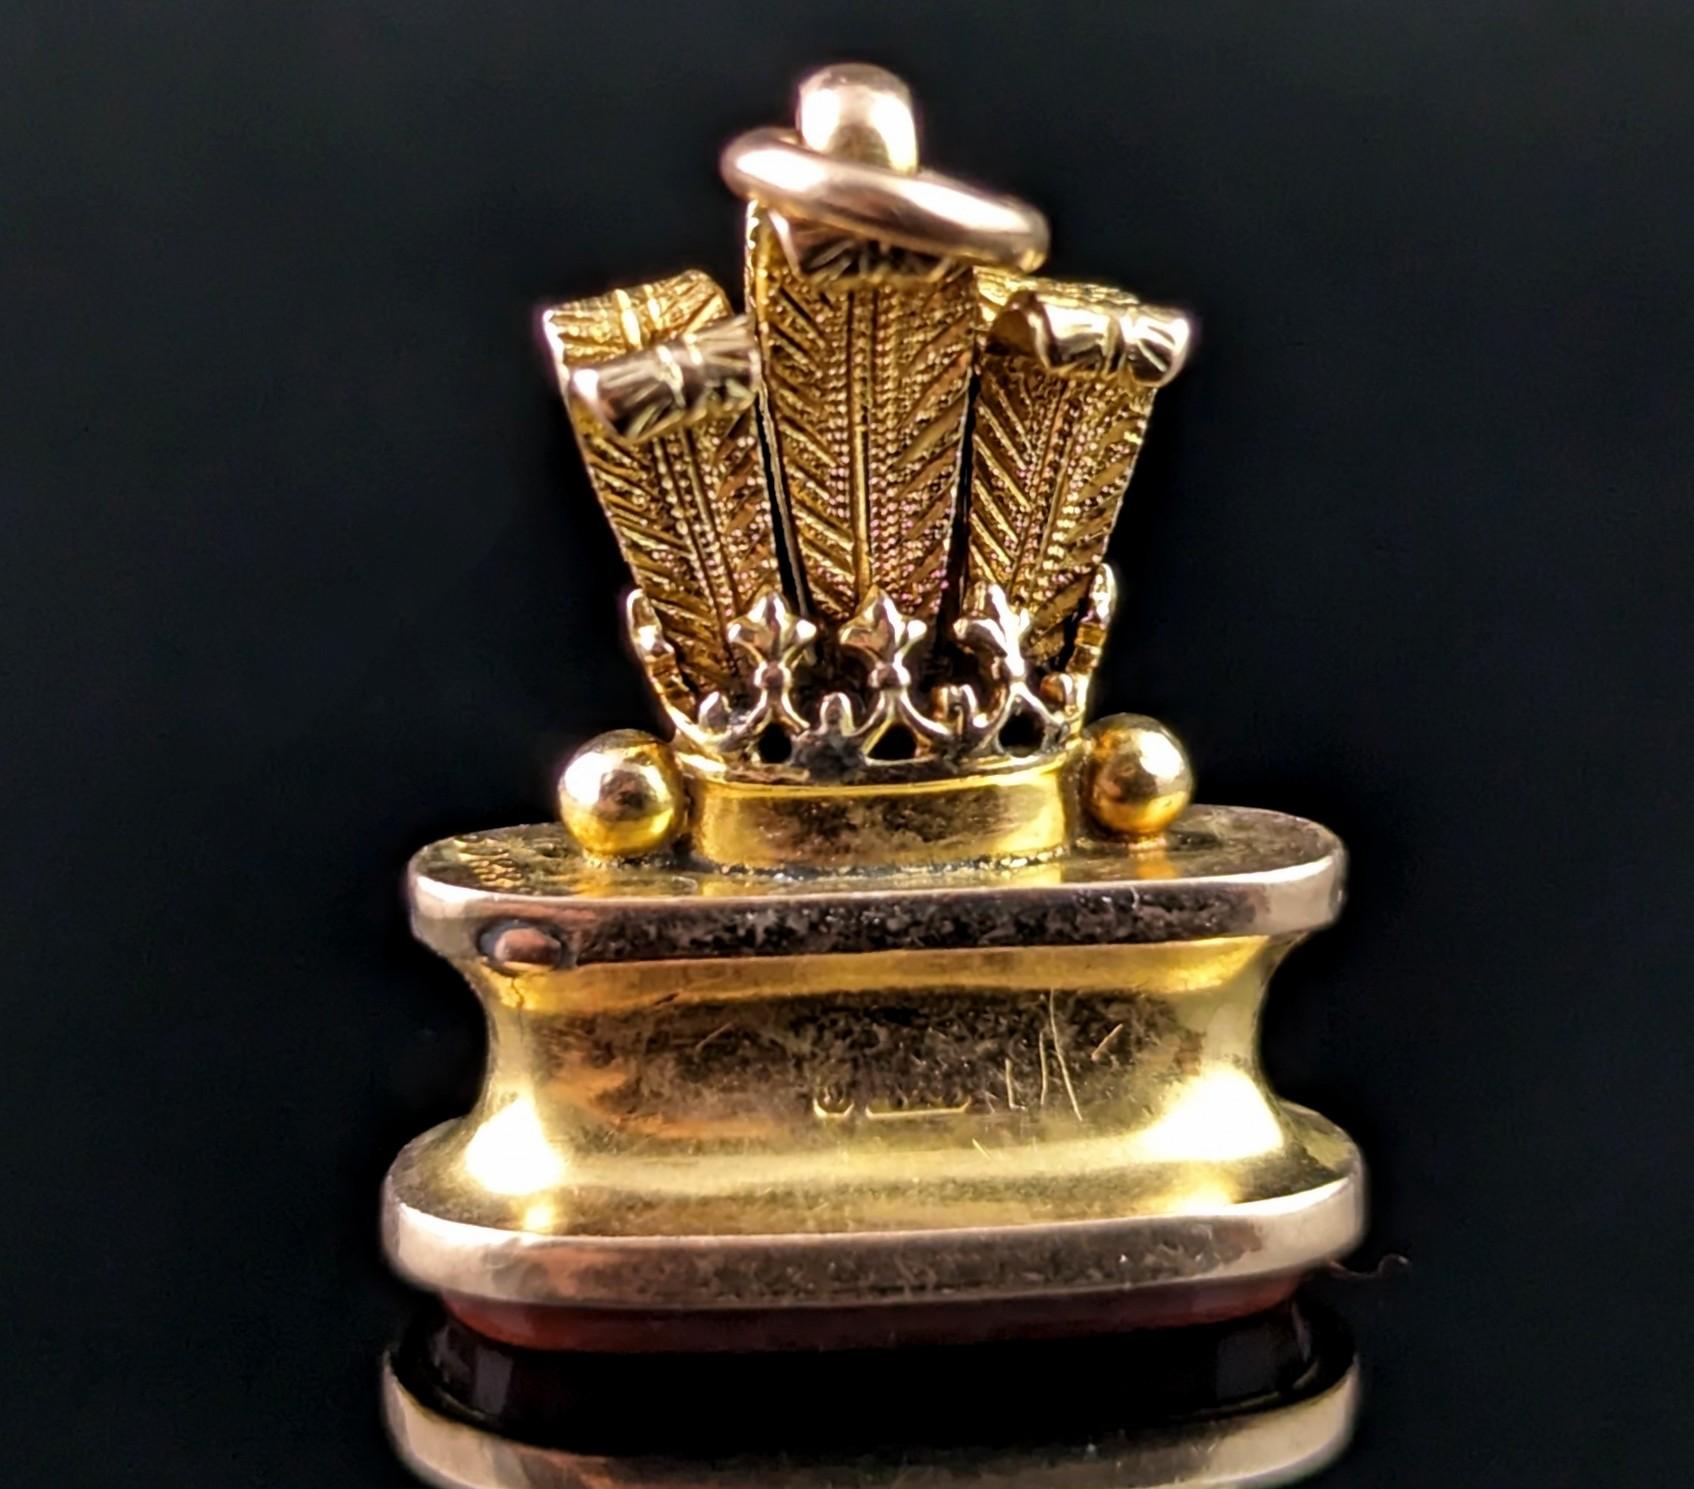 A rich and regal antique 9ct gold seal fob pendant is always a delight to find.

This seal fob pendant is crafted in hallmarked solid 9ct gold with a rich bloomed finish, earlier hallmarked fobs are always harder to find and a real treat when we